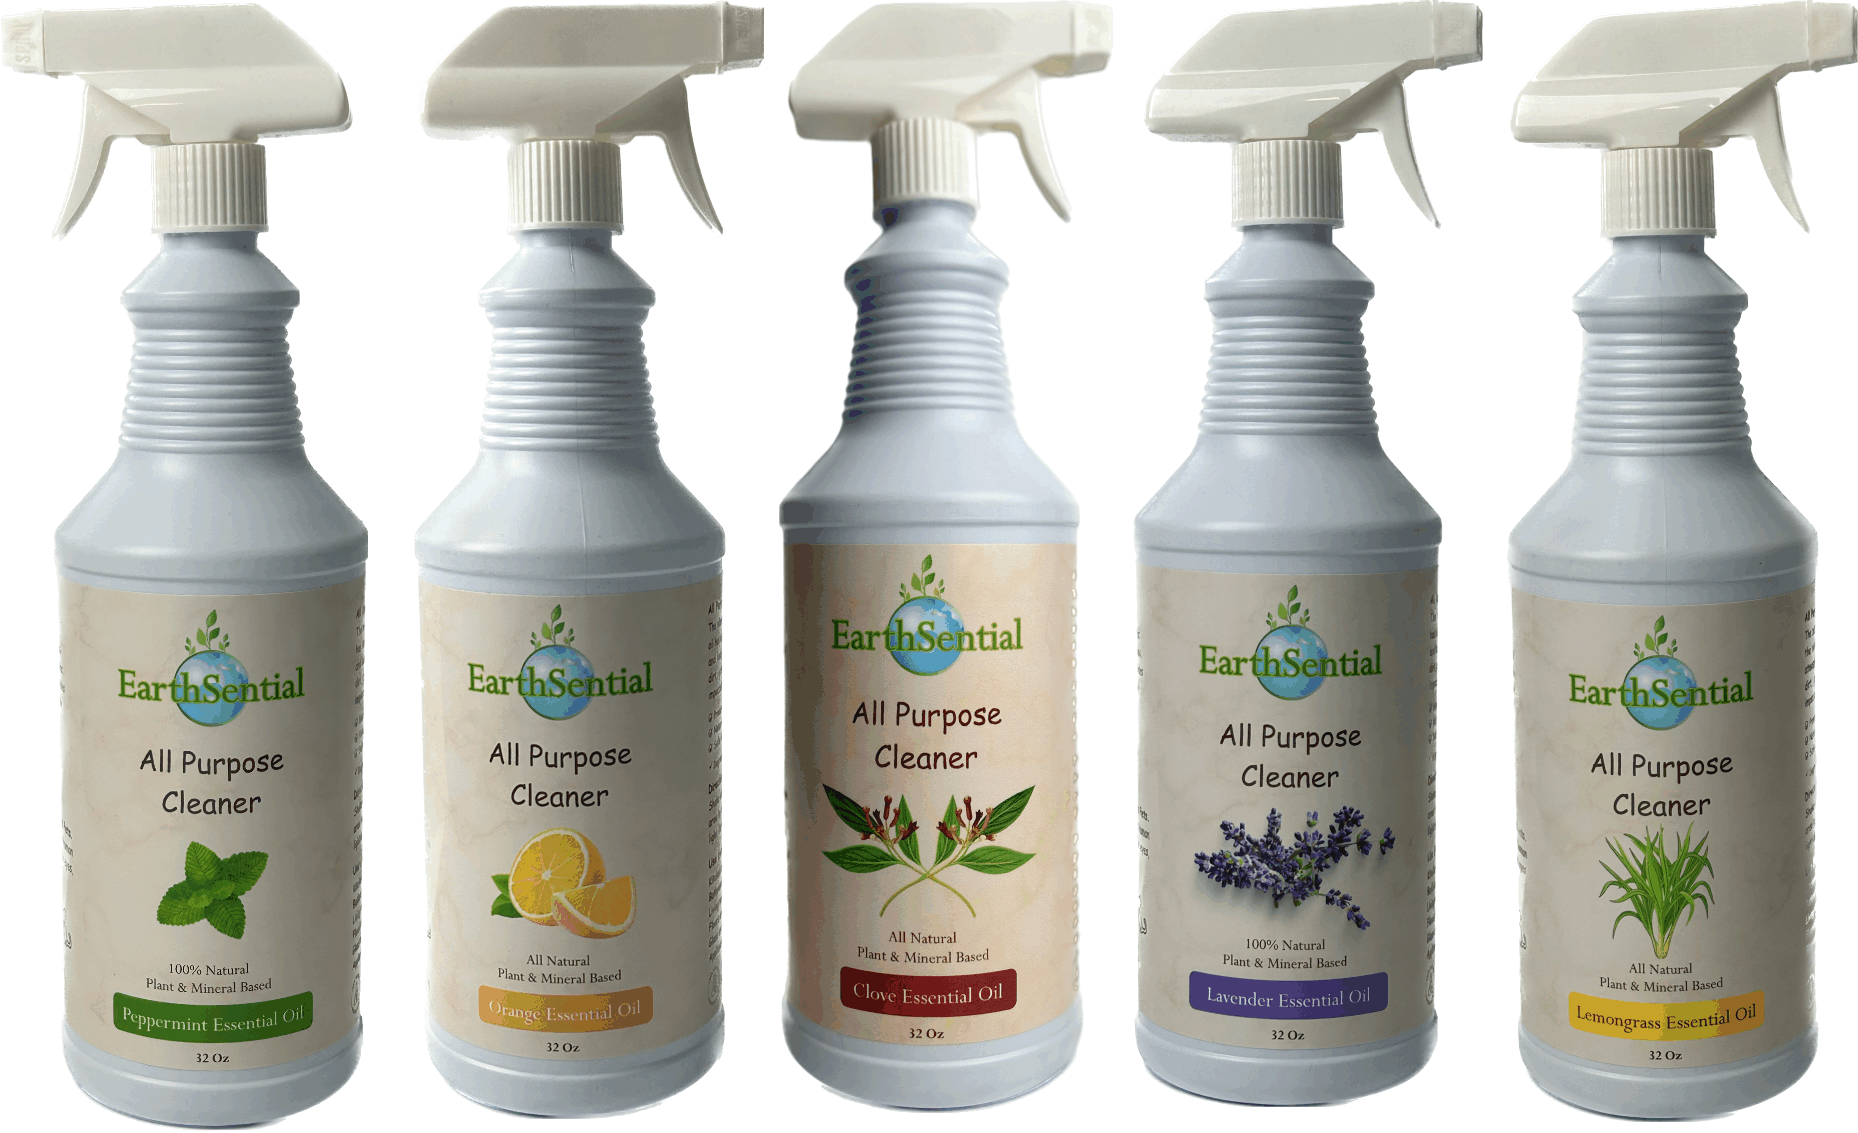 earthsential's all purpose cleaners